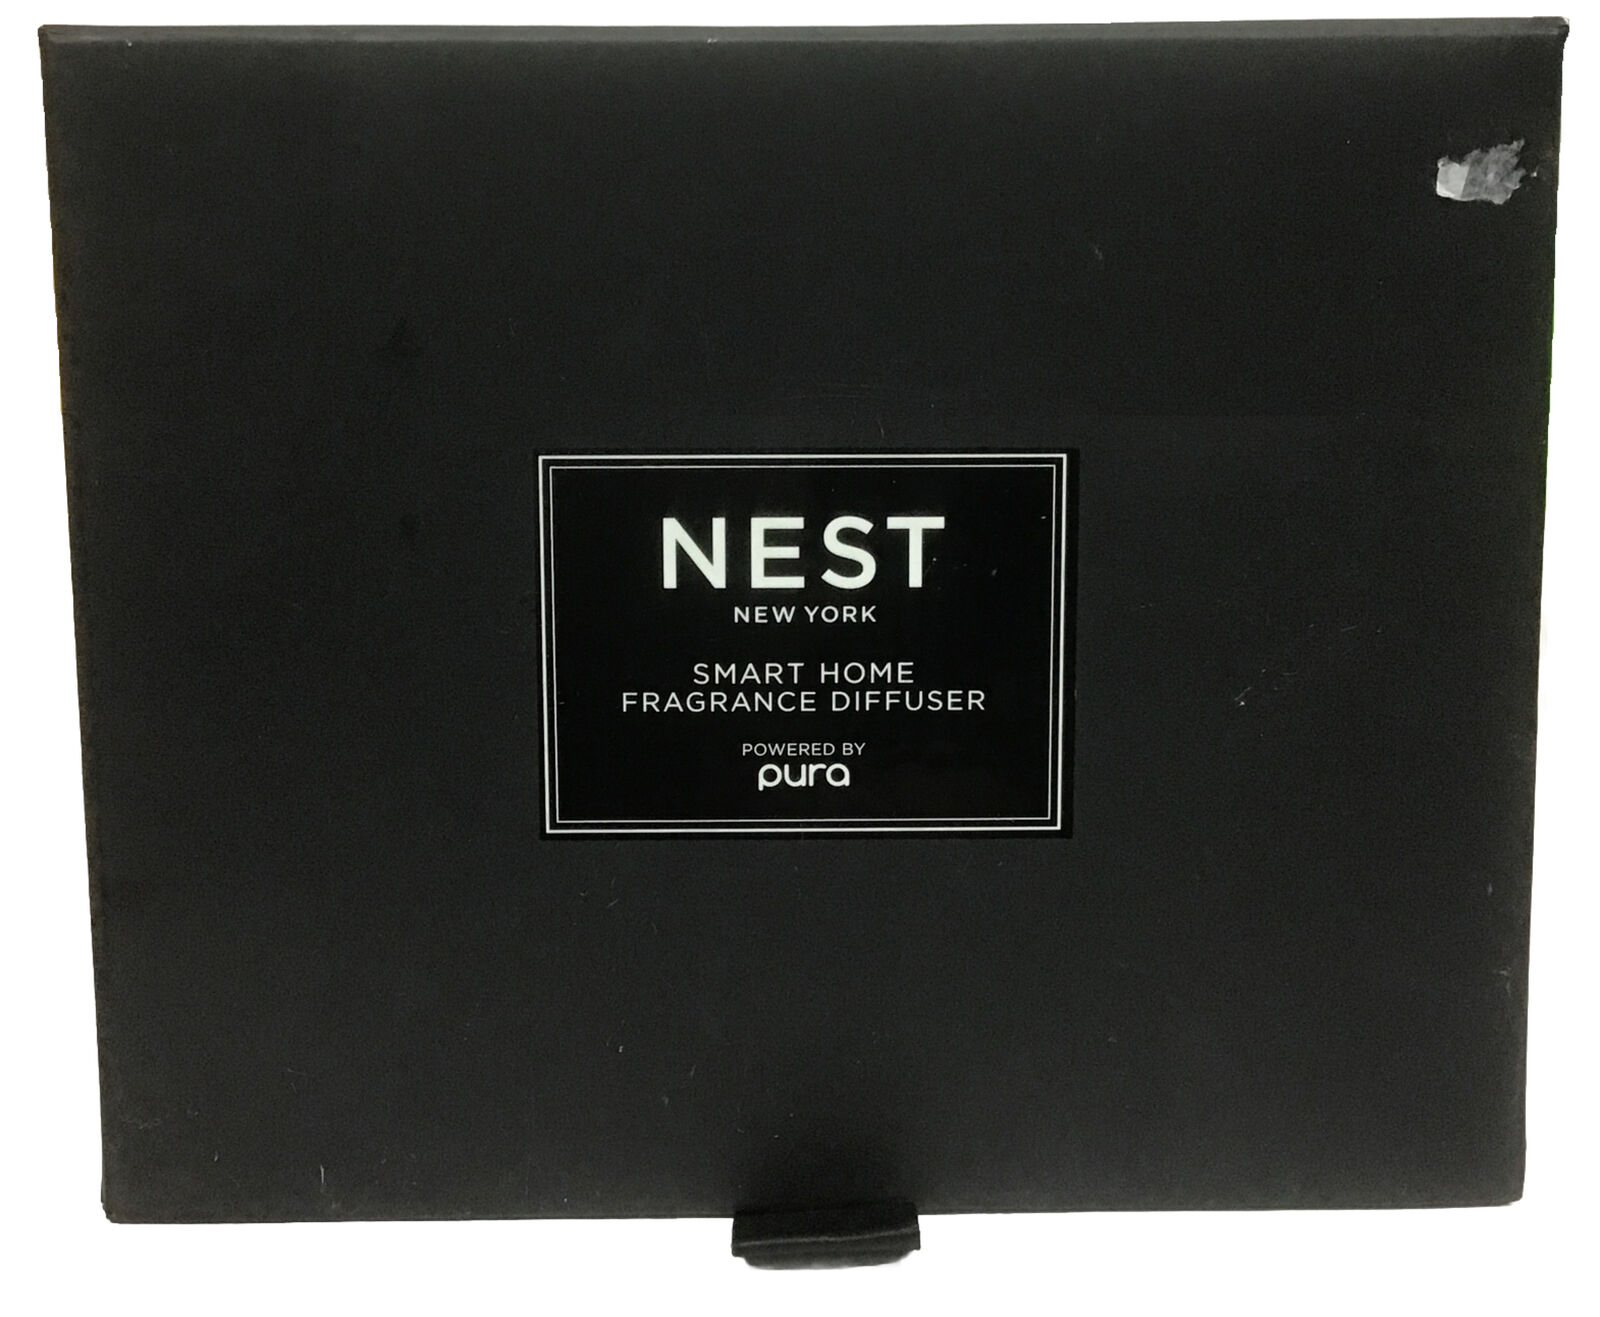 Nest Smart Home Fragance Diffuser - Rose Noir Oud & Birchwood Pine,As Pictured. 